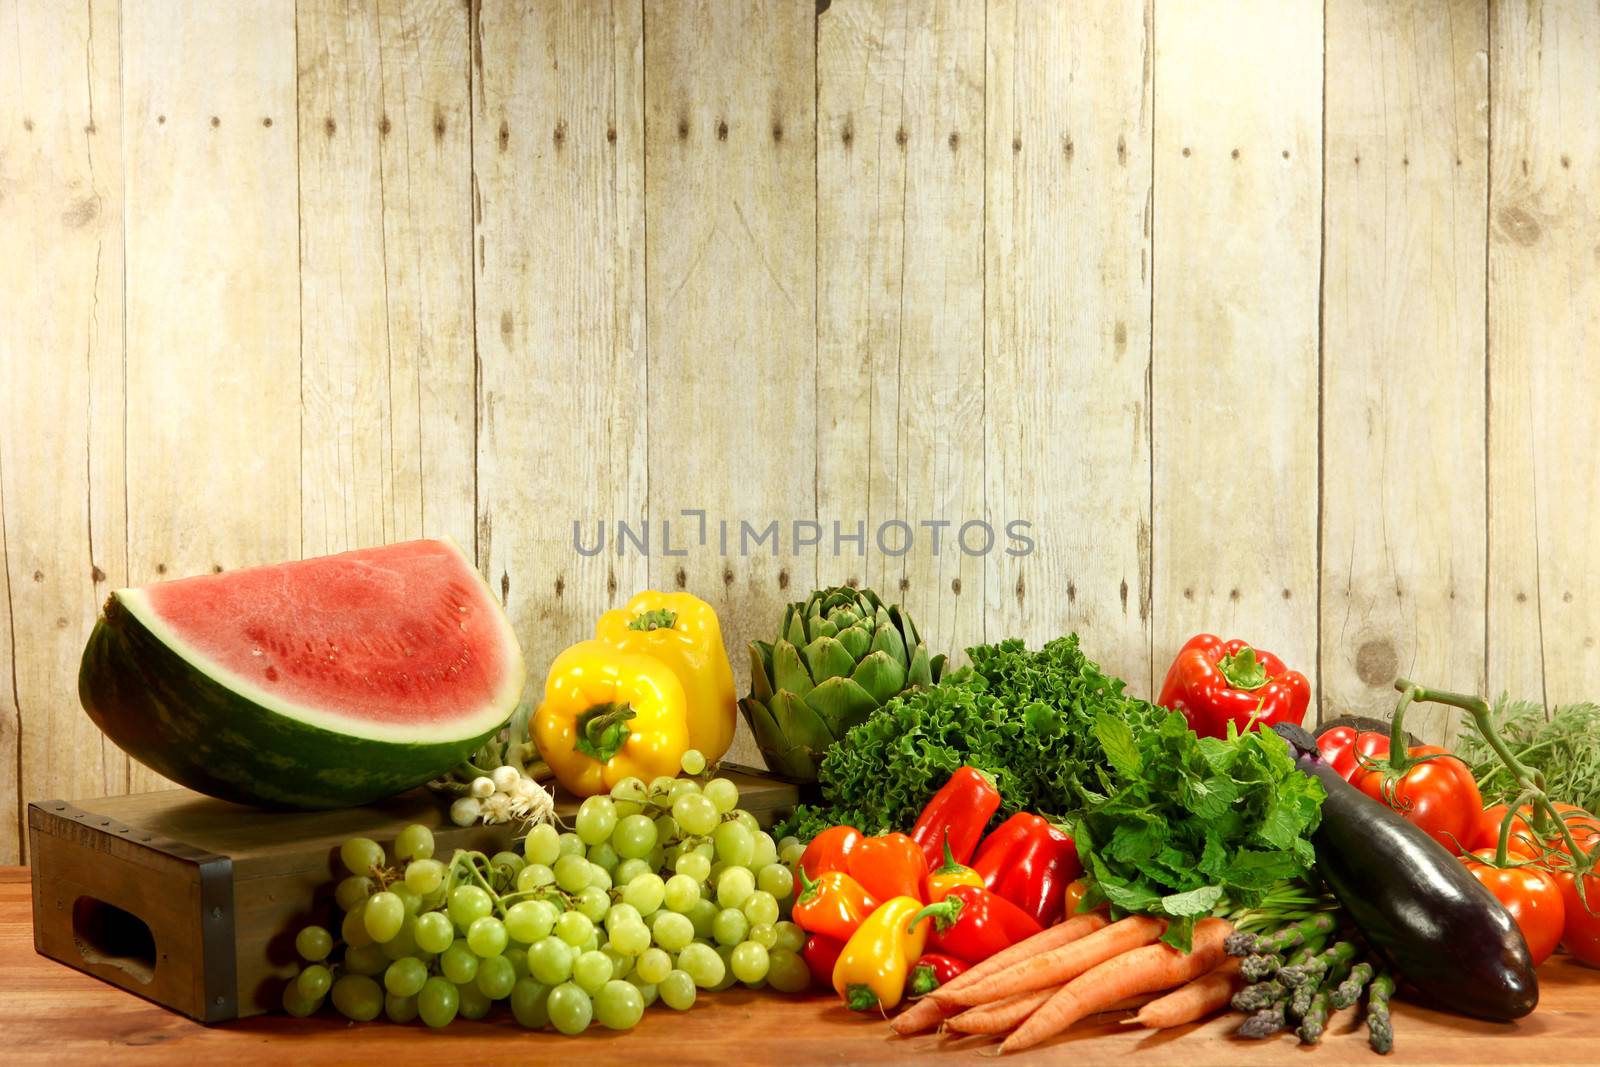 Bunch of Grocery Produce Items on a Wooden Plank